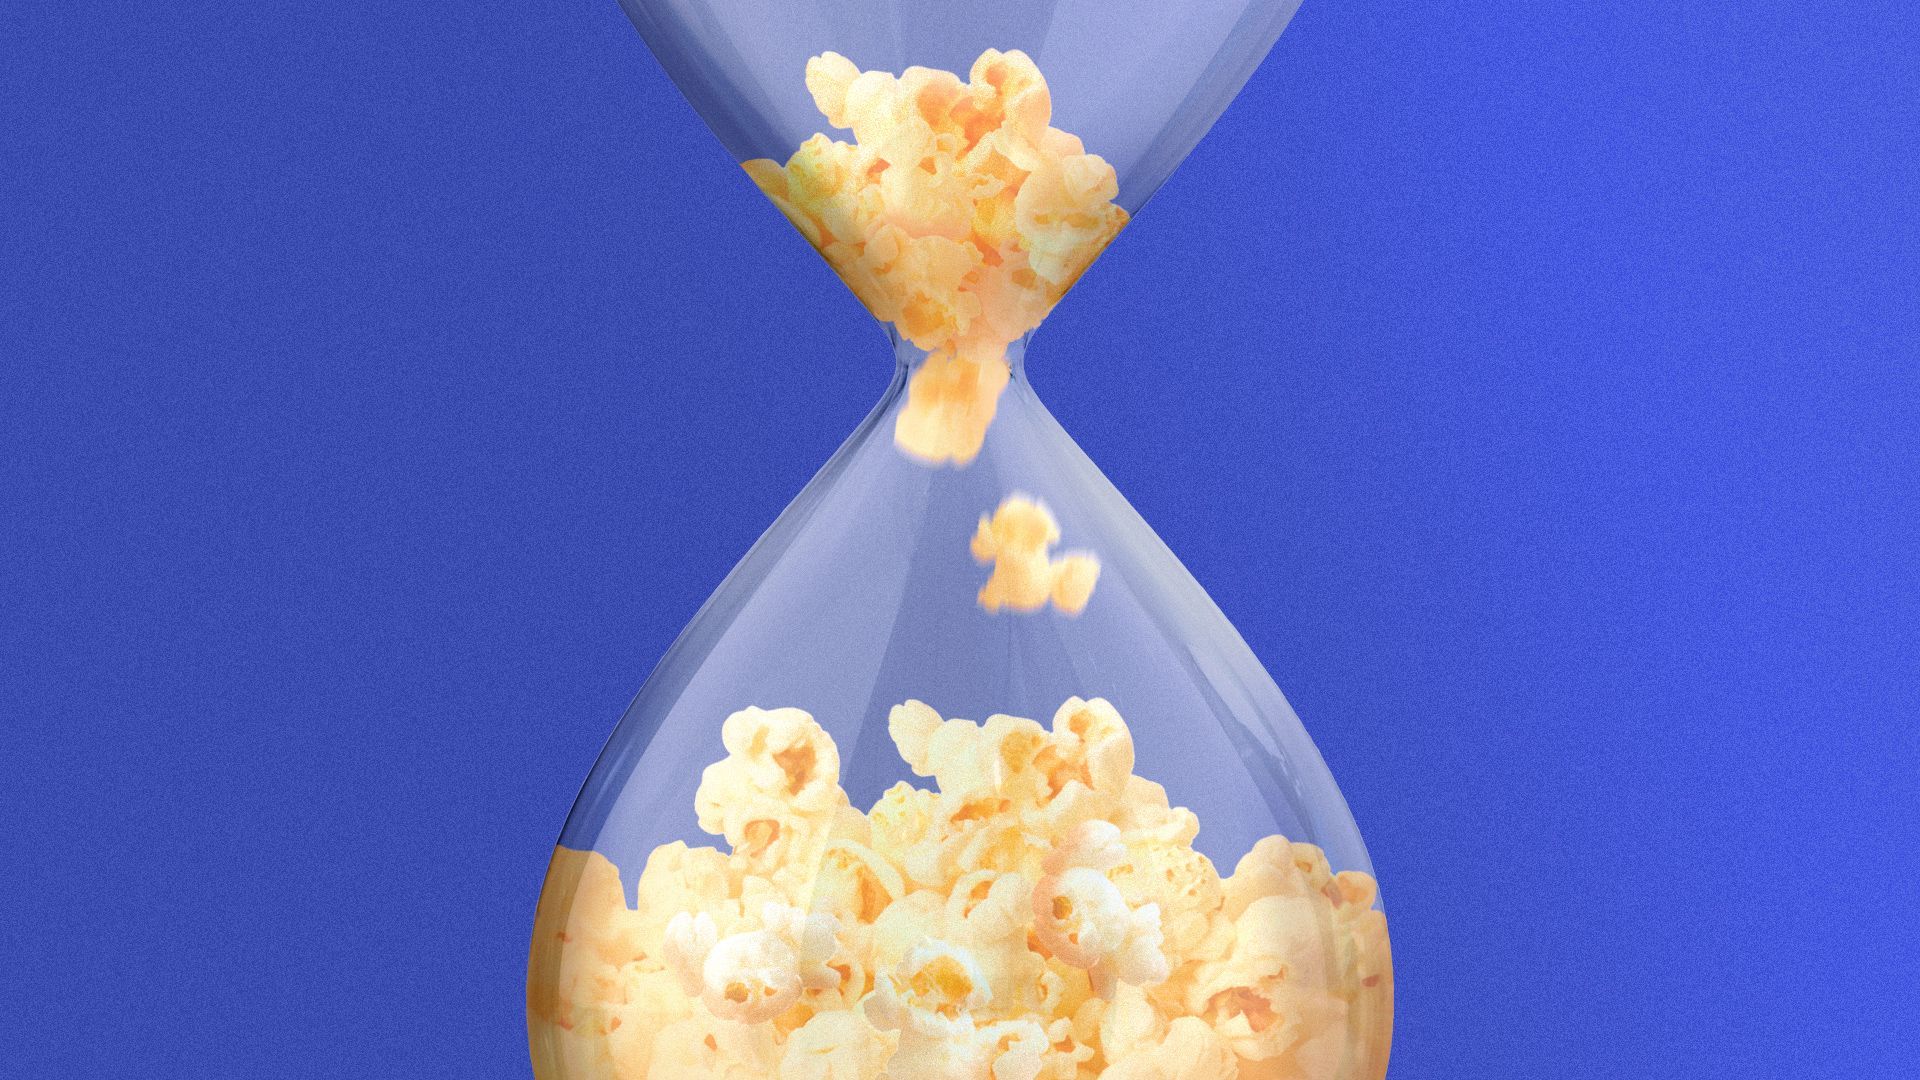 Illustration of an hourglass with popcorn instead of sand.